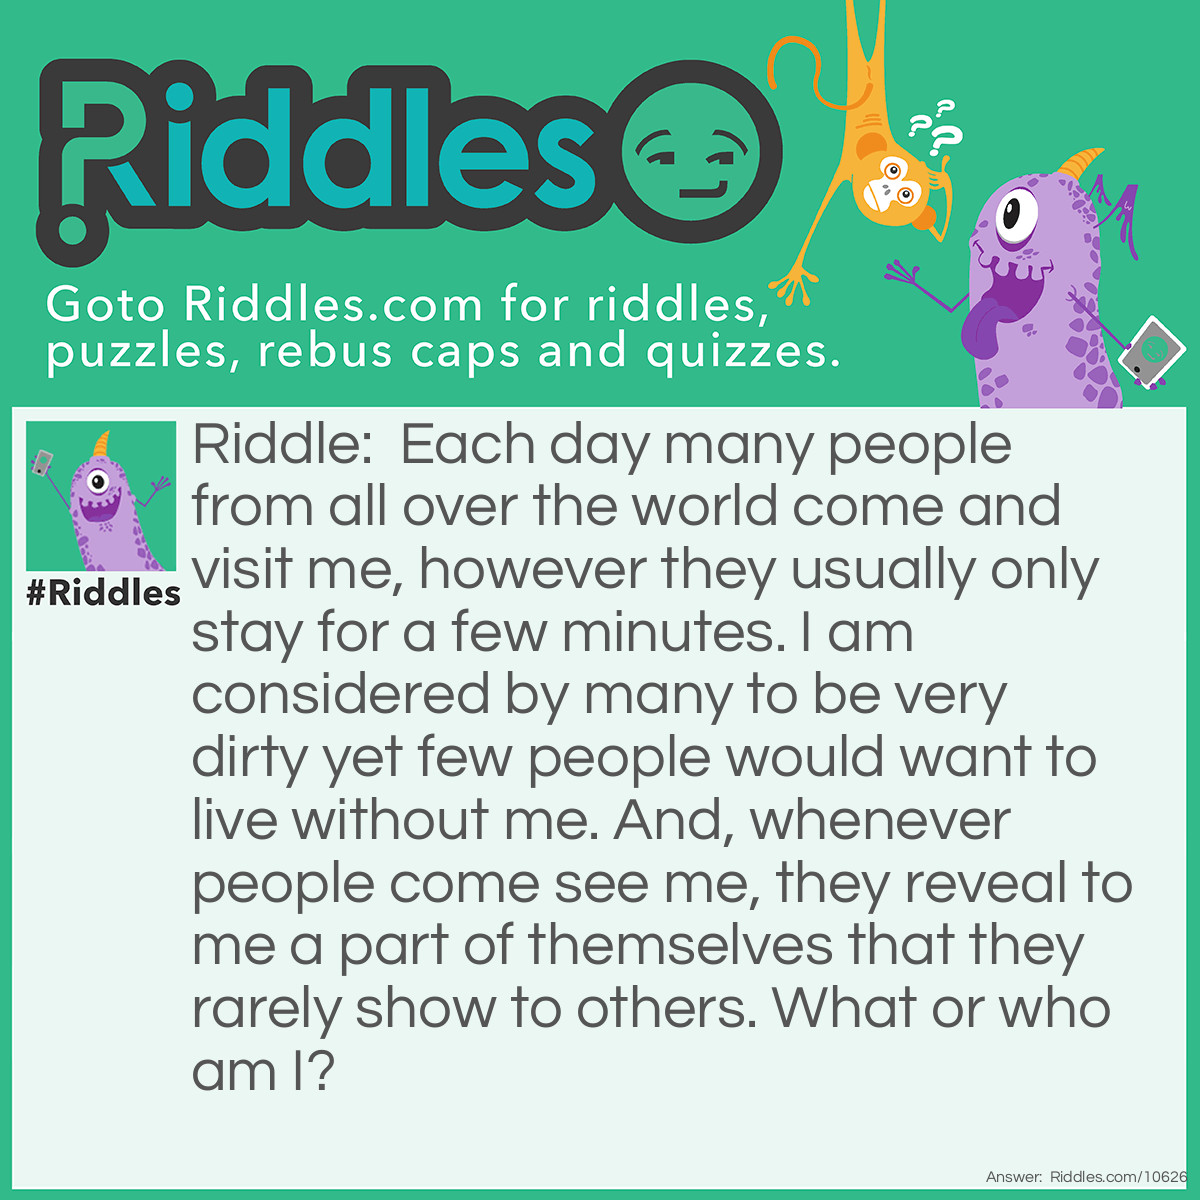 Riddle: Each day many people from all over the world come and visit me, however they usually only stay for a few minutes. I am considered by many to be very dirty yet few people would want to live without me. And, whenever people come see me, they reveal to me a part of themselves that they rarely show to others. What or who am I? Answer: A toilet.